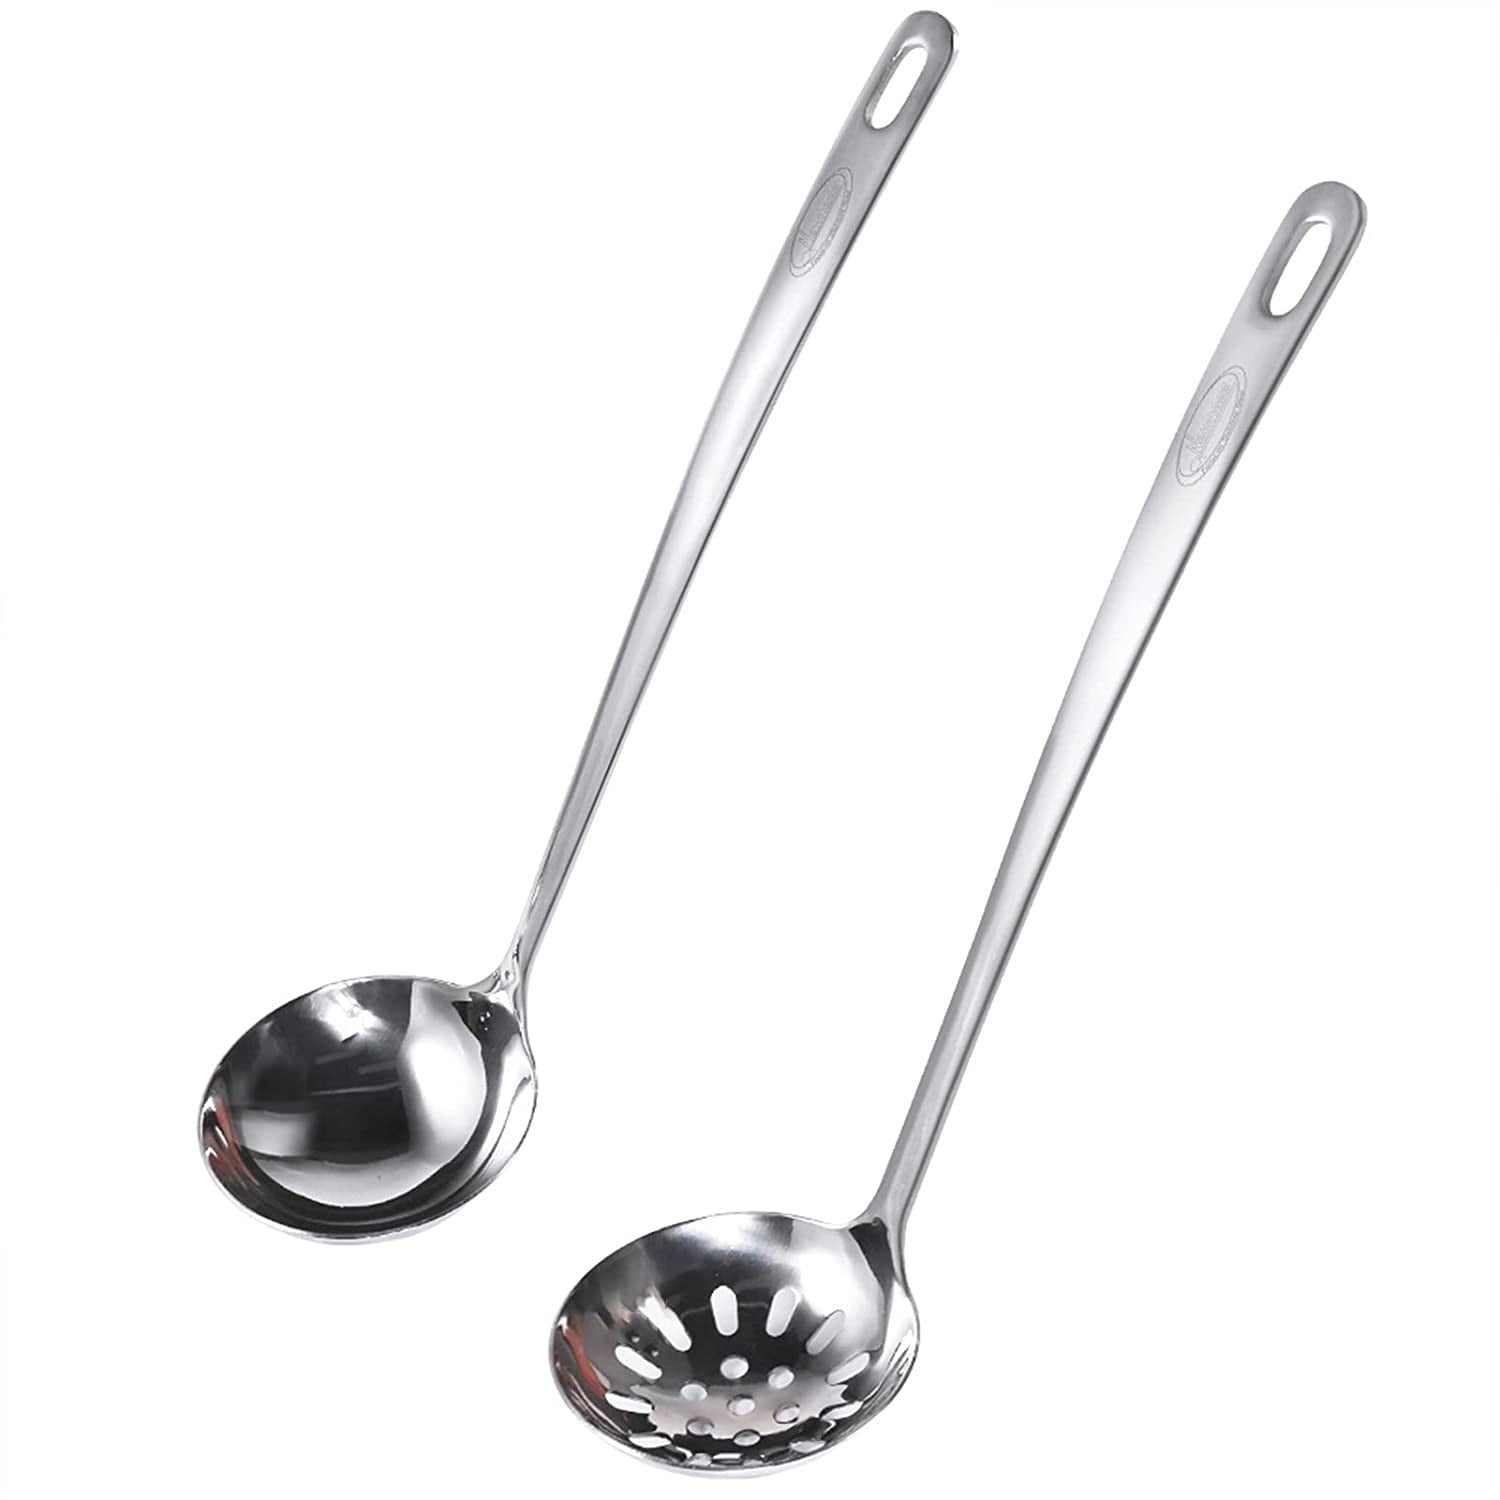 Colander Strainer Spoon Soup Stainless Steel Ladle Pot Hot Cooking Skimmer W